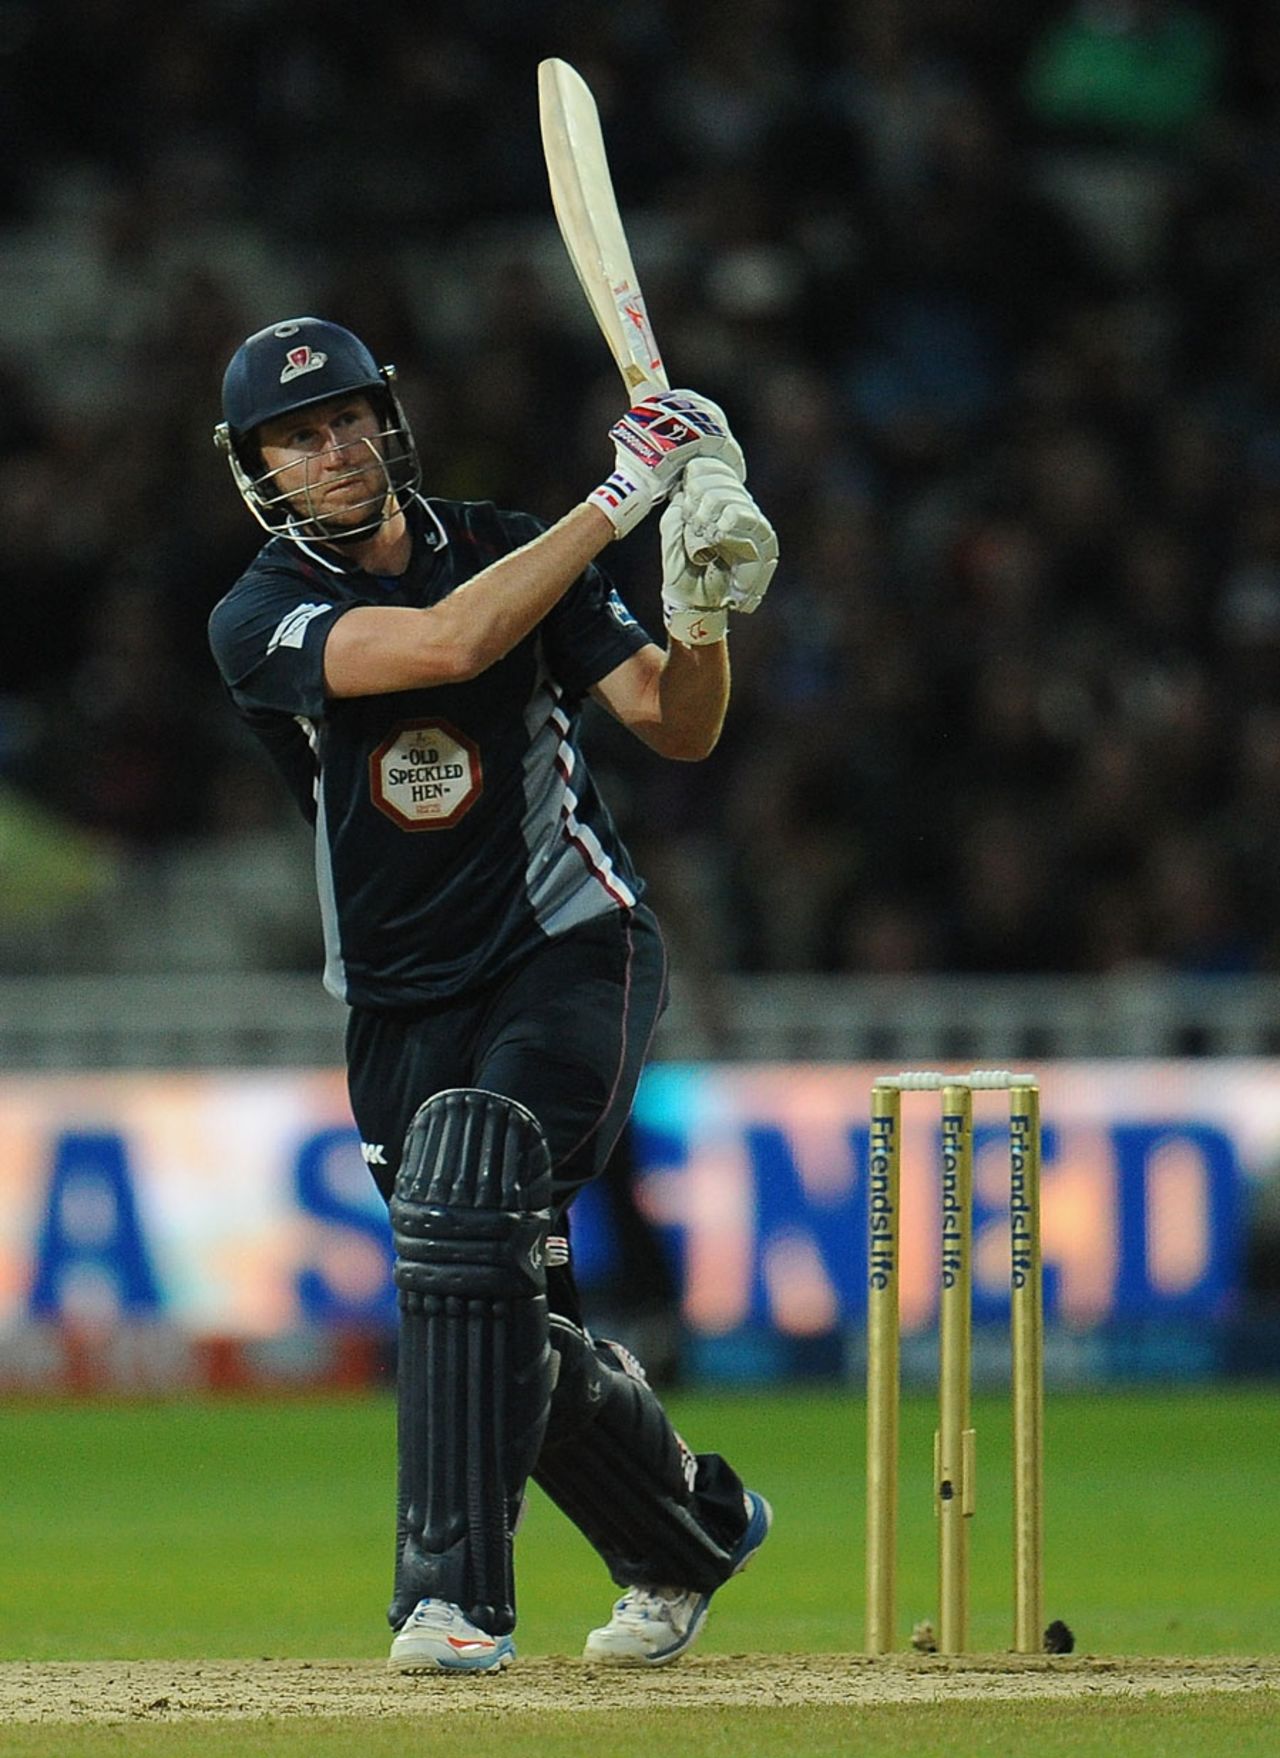 Alex Wakely finished with 59 off 30 balls, Northamptonshire v Surrey, FLt20 final, Edgbaston, August 17, 2013